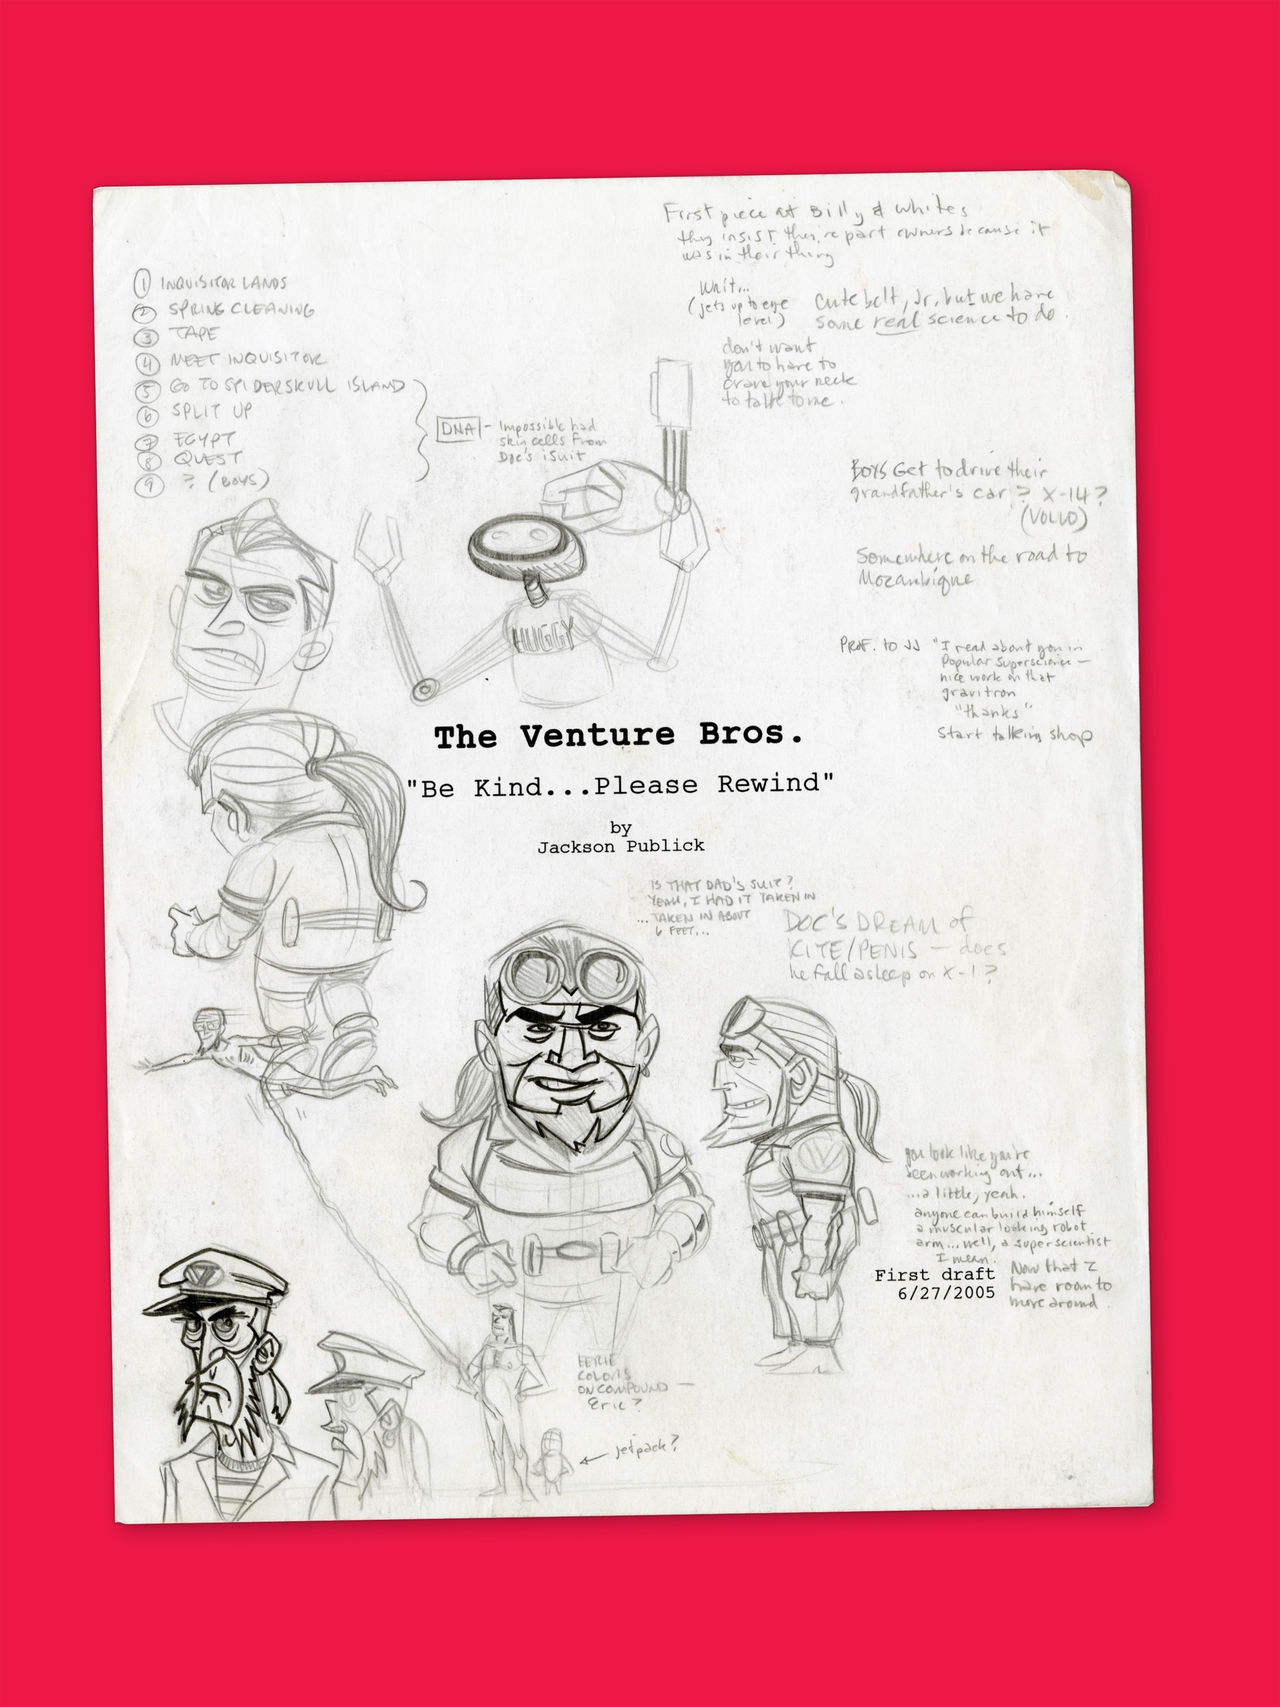 Go Team Venture! - The Art and Making of the Venture Bros 73